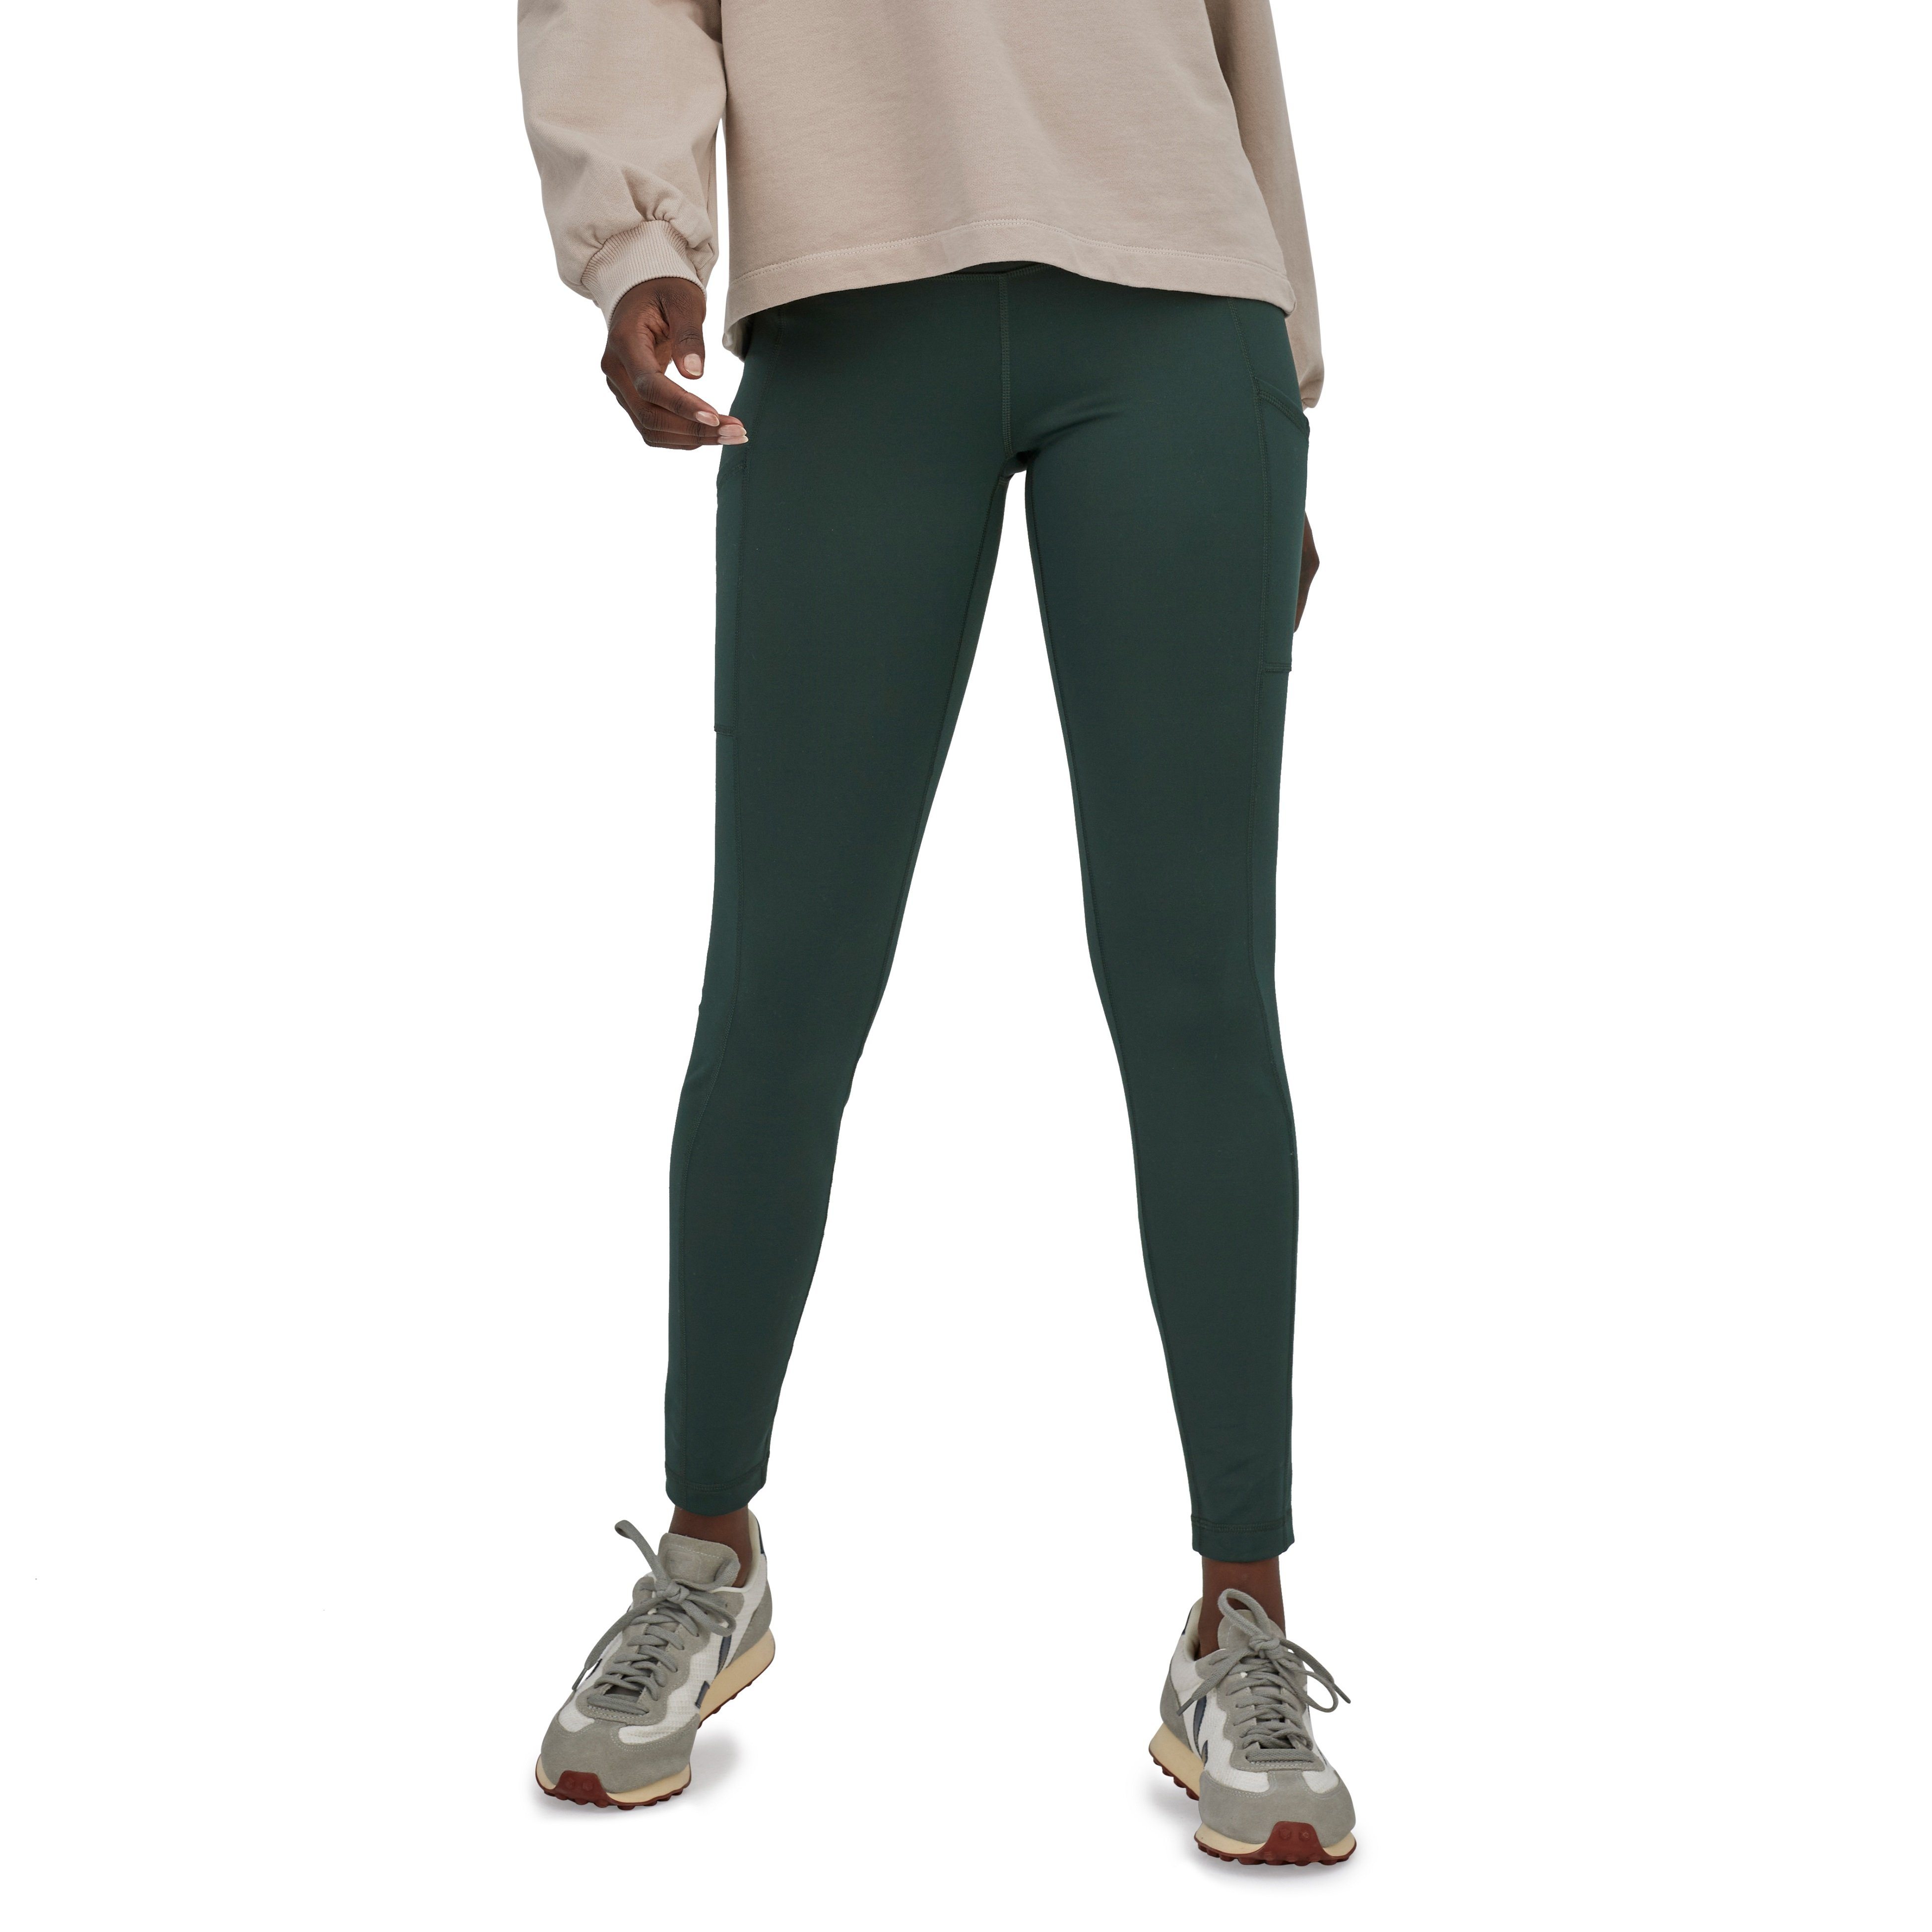 Patagonia Women's Pack Out Tights, Northern Green / M